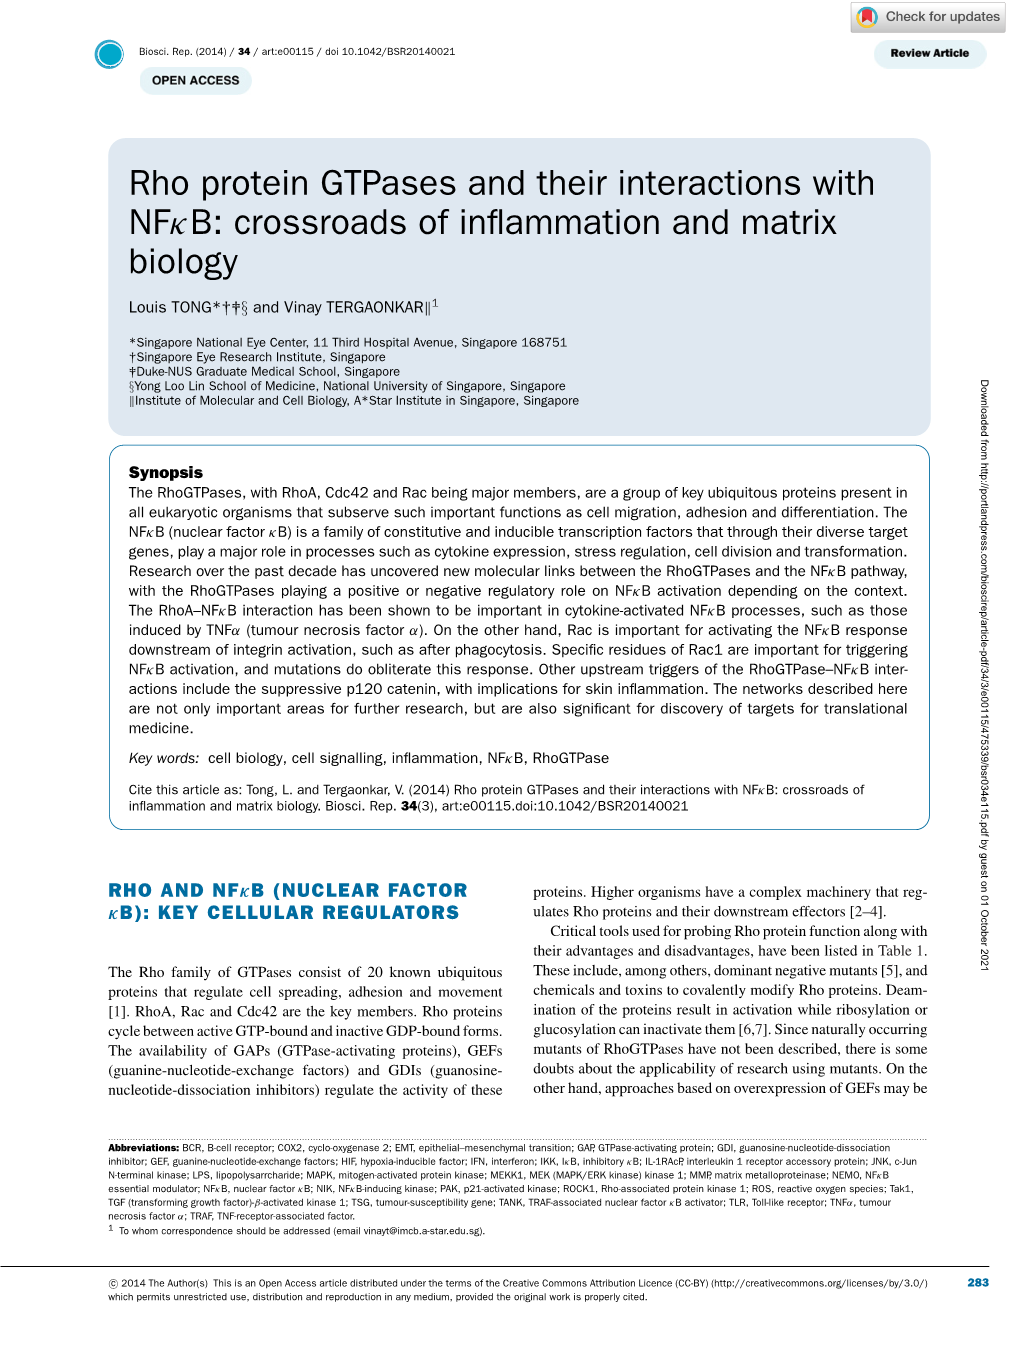 Rho Protein Gtpases and Their Interactions with Nfκb: Crossroads of Inﬂammation and Matrix Biology